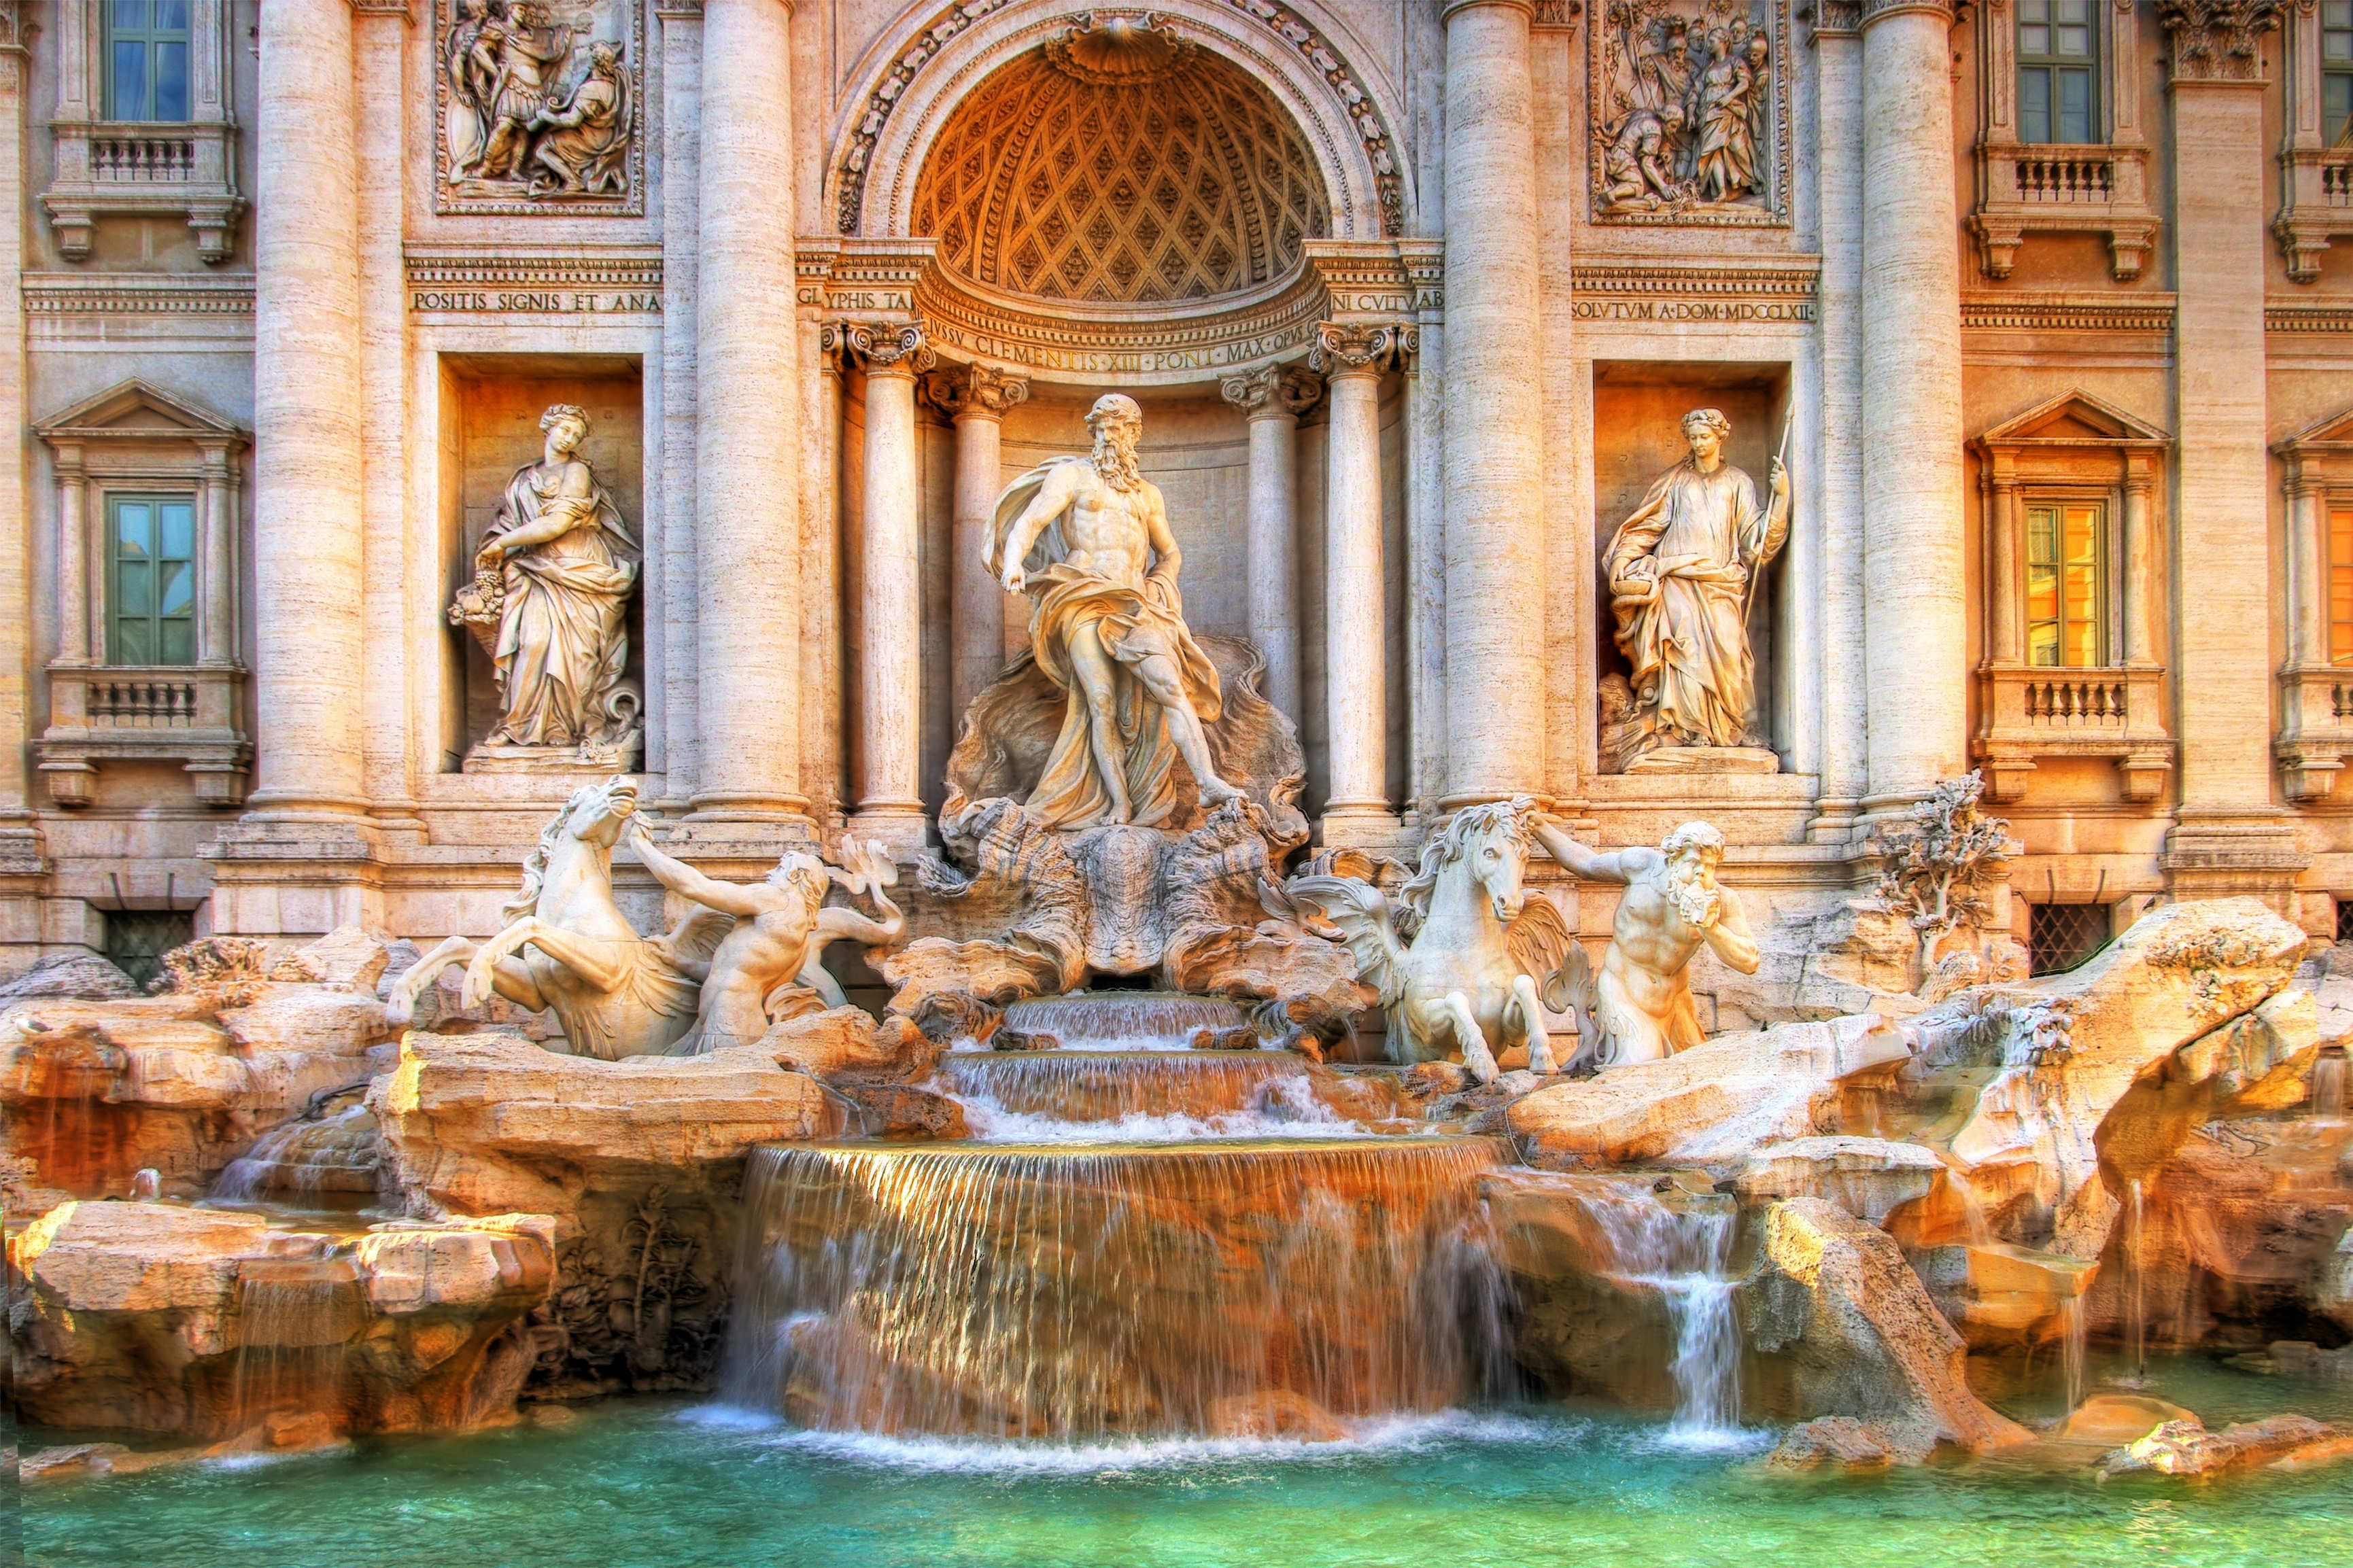 A frontal view of the Trevi fountain's marble statues in golden, warm light